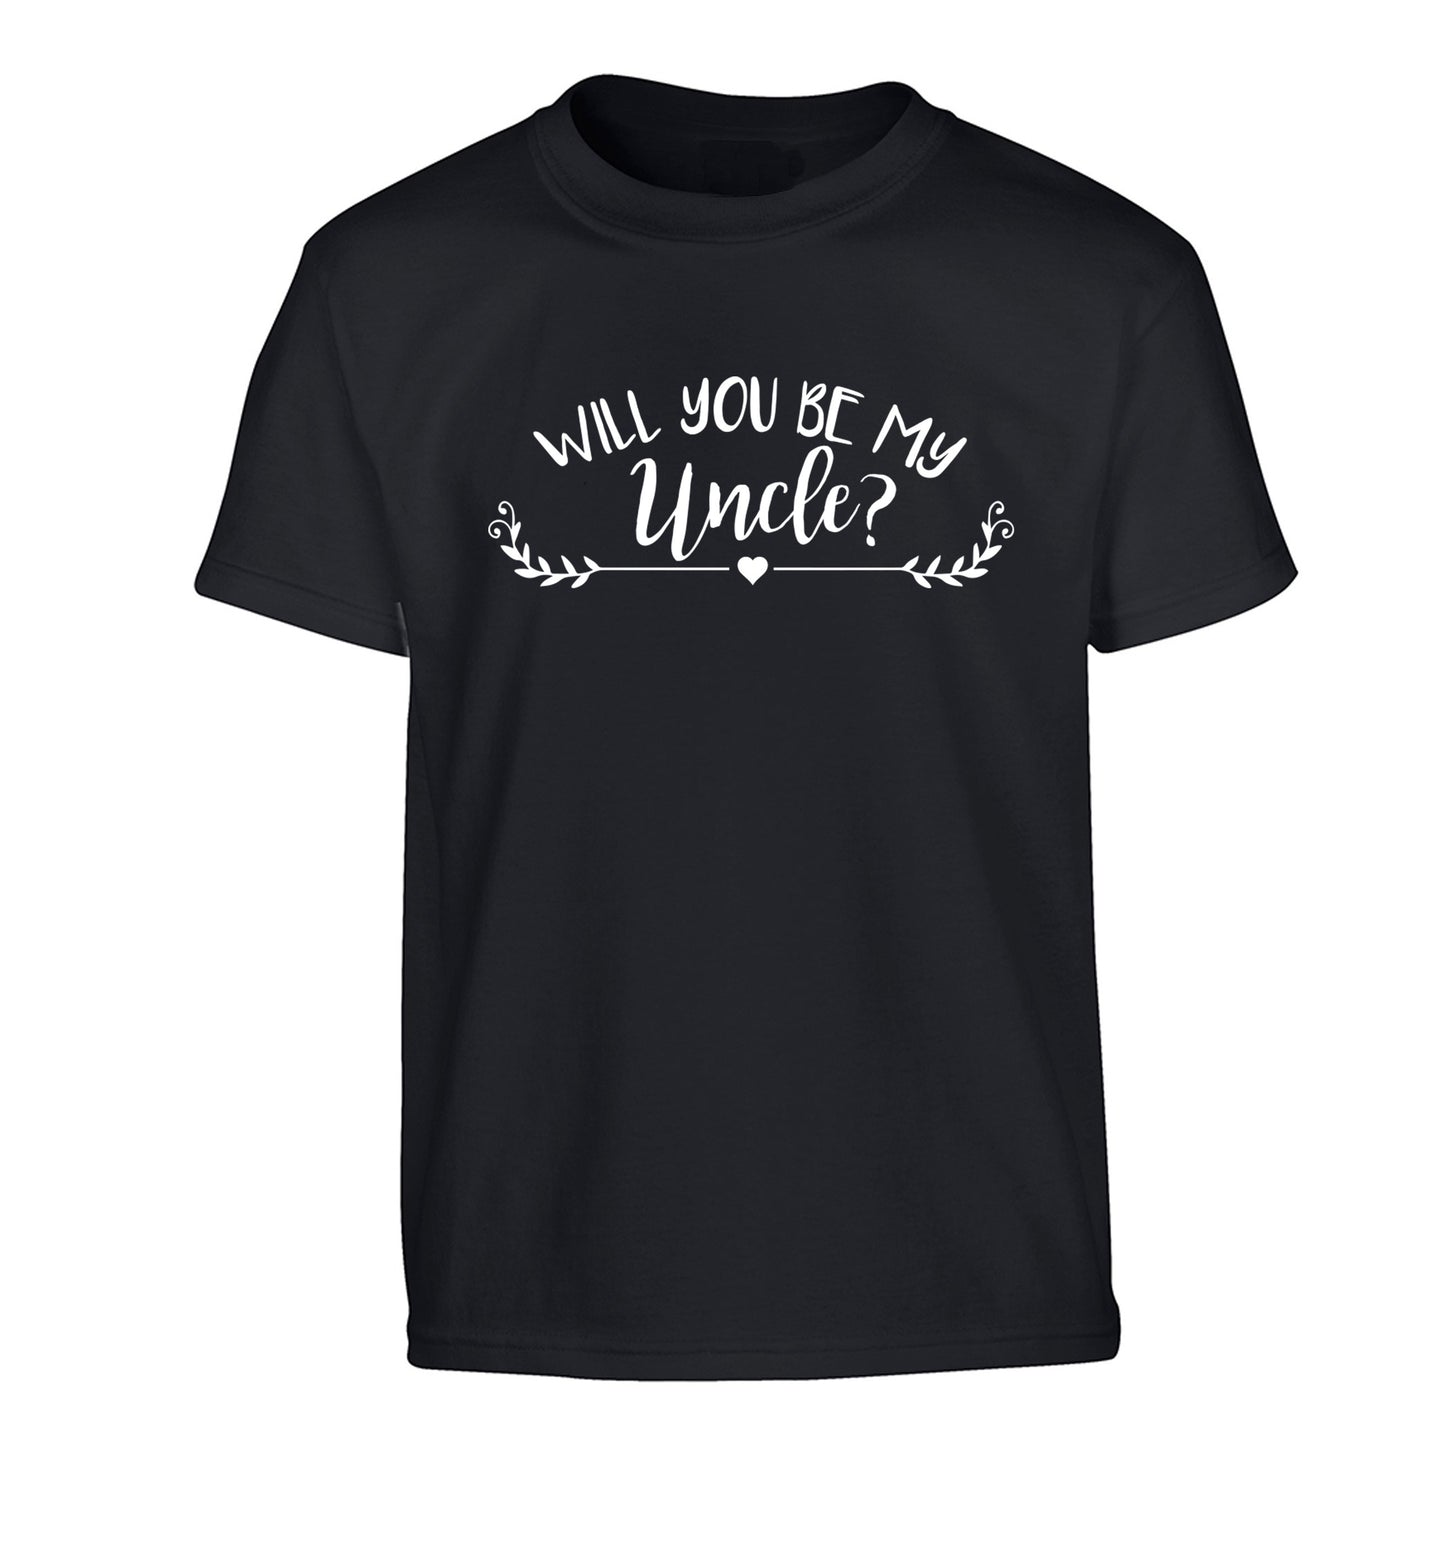 Will you be my uncle? Children's black Tshirt 12-14 Years